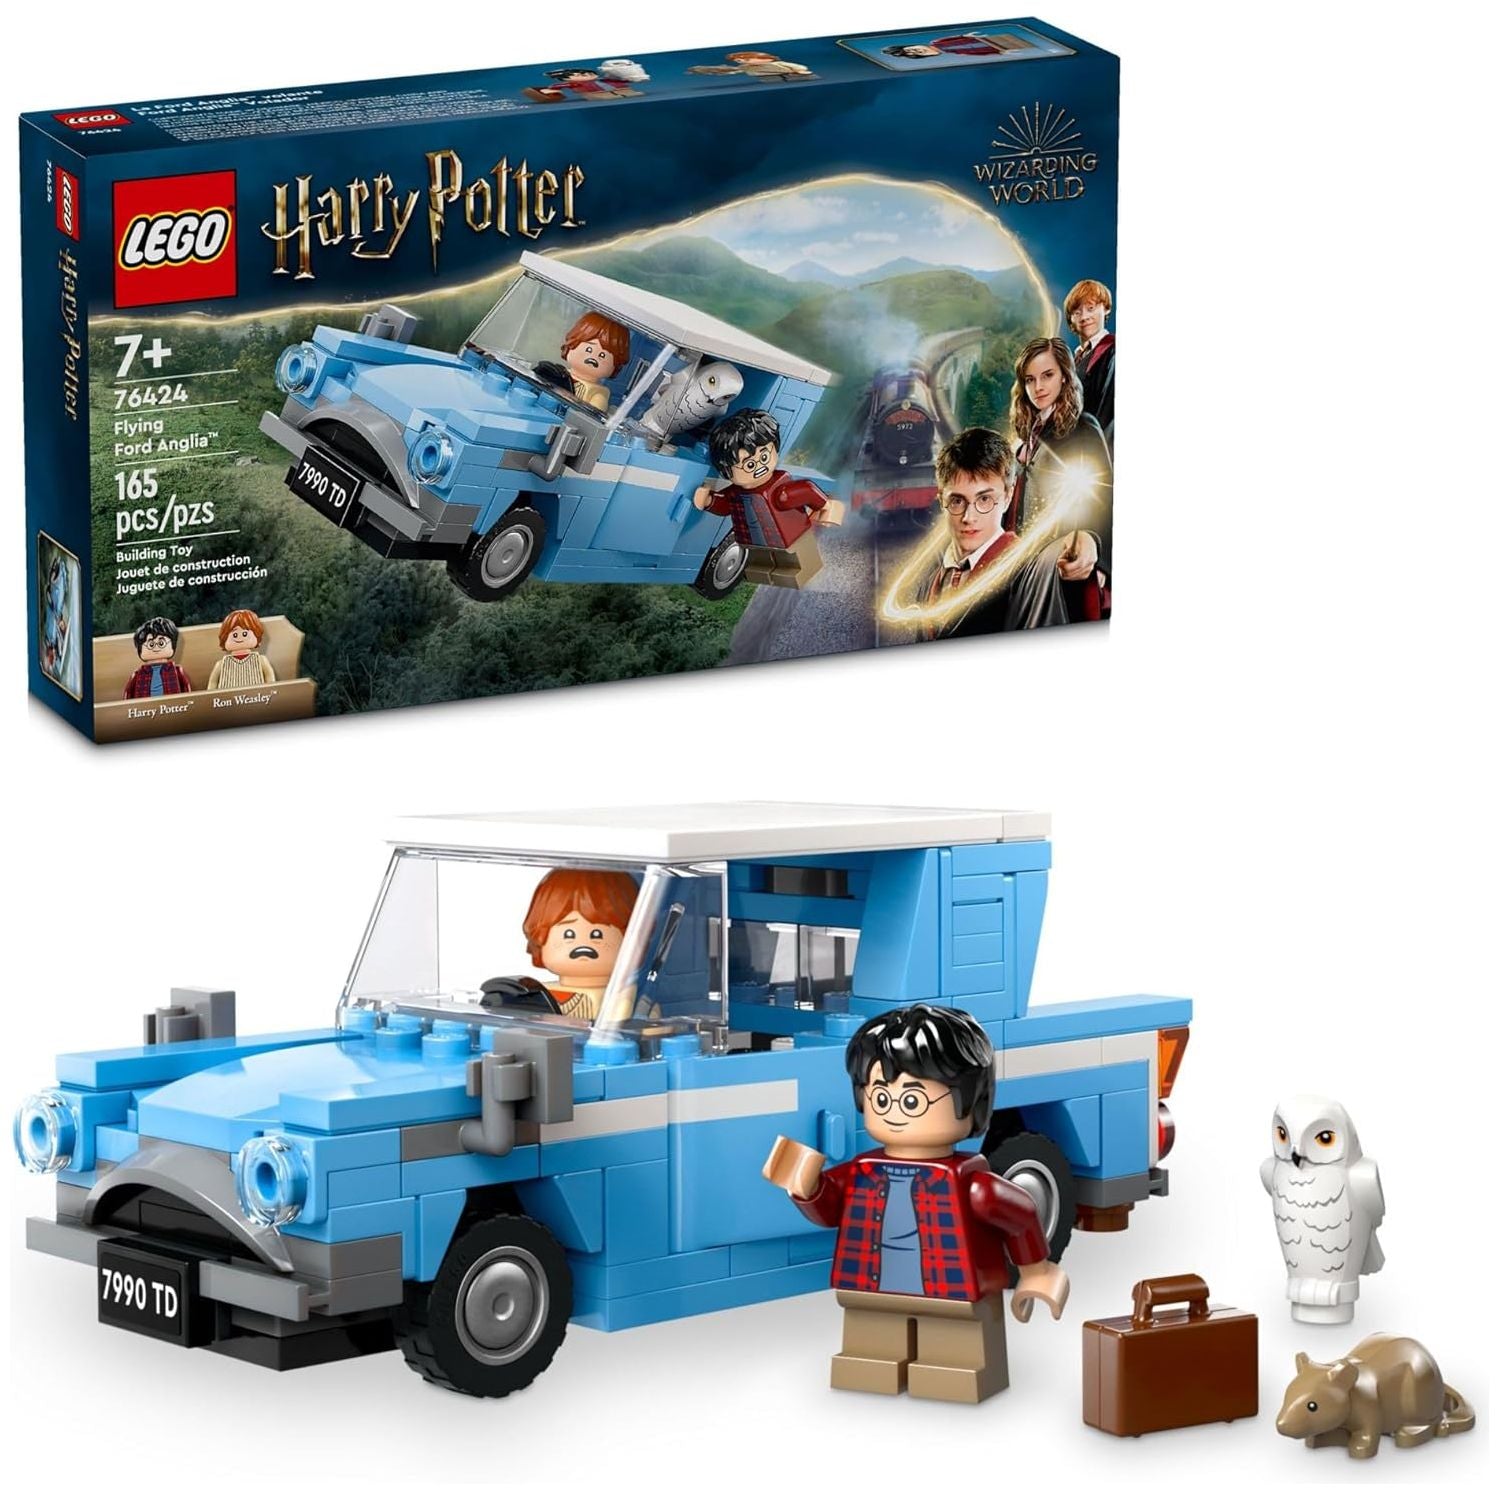 LEGO 76424 Harry Potter Flying Ford Anglia, Buildable Car Toy with 2 Minifigures for Role Play, Fantasy Playset for Kids, Harry Potter Car.